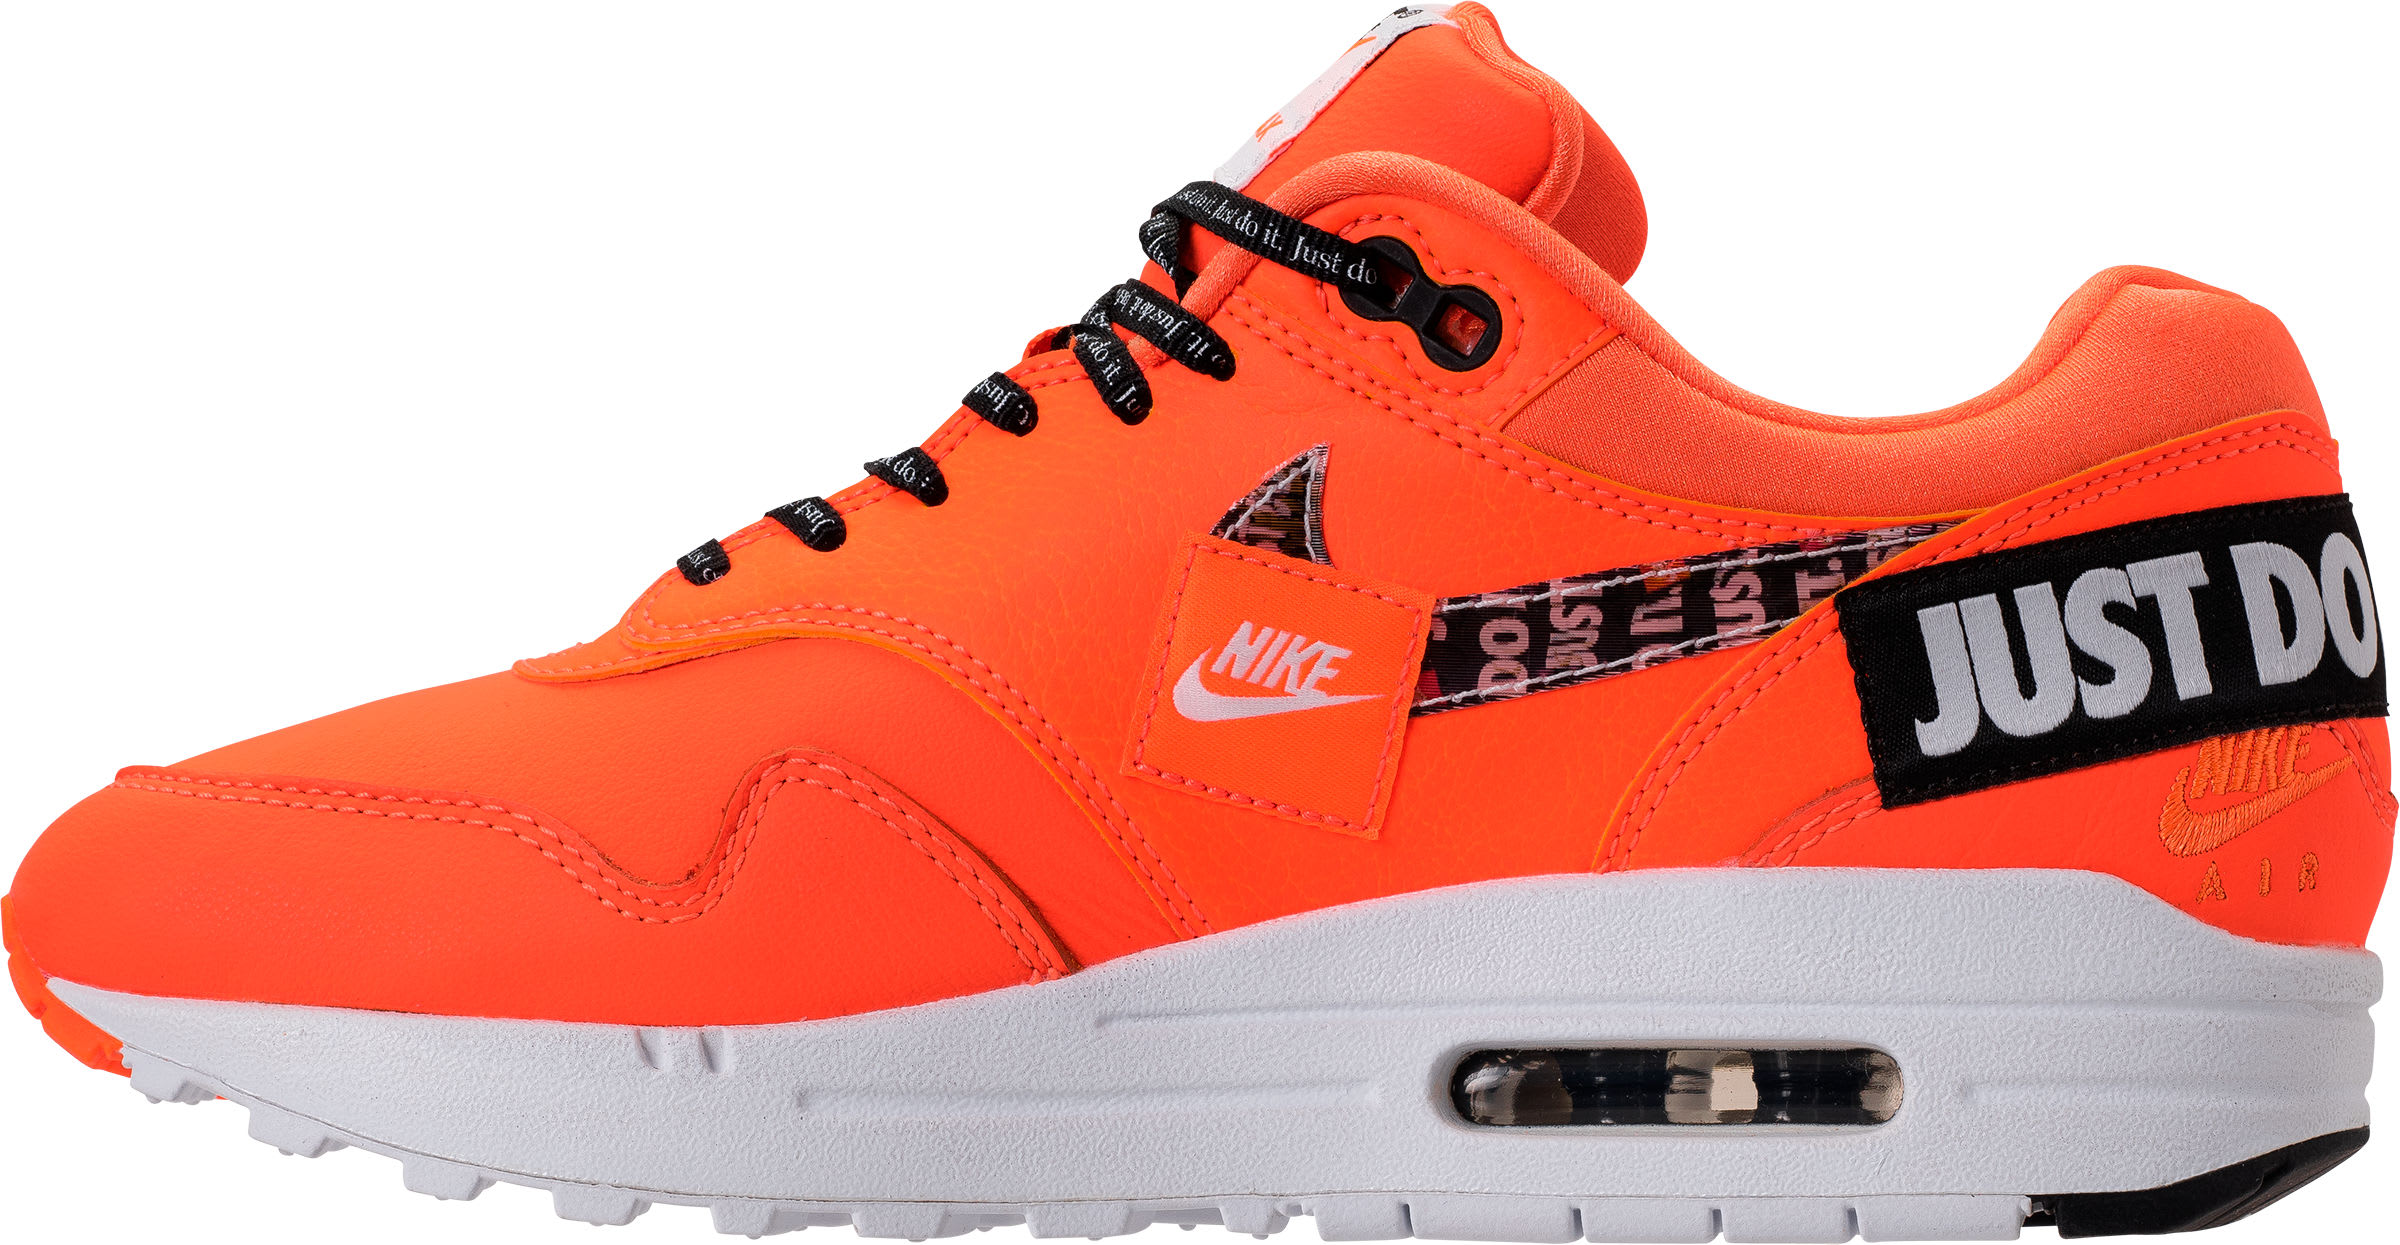 Nike Air Max 1 Just Do It Orange Release Date 917691-800 Medial